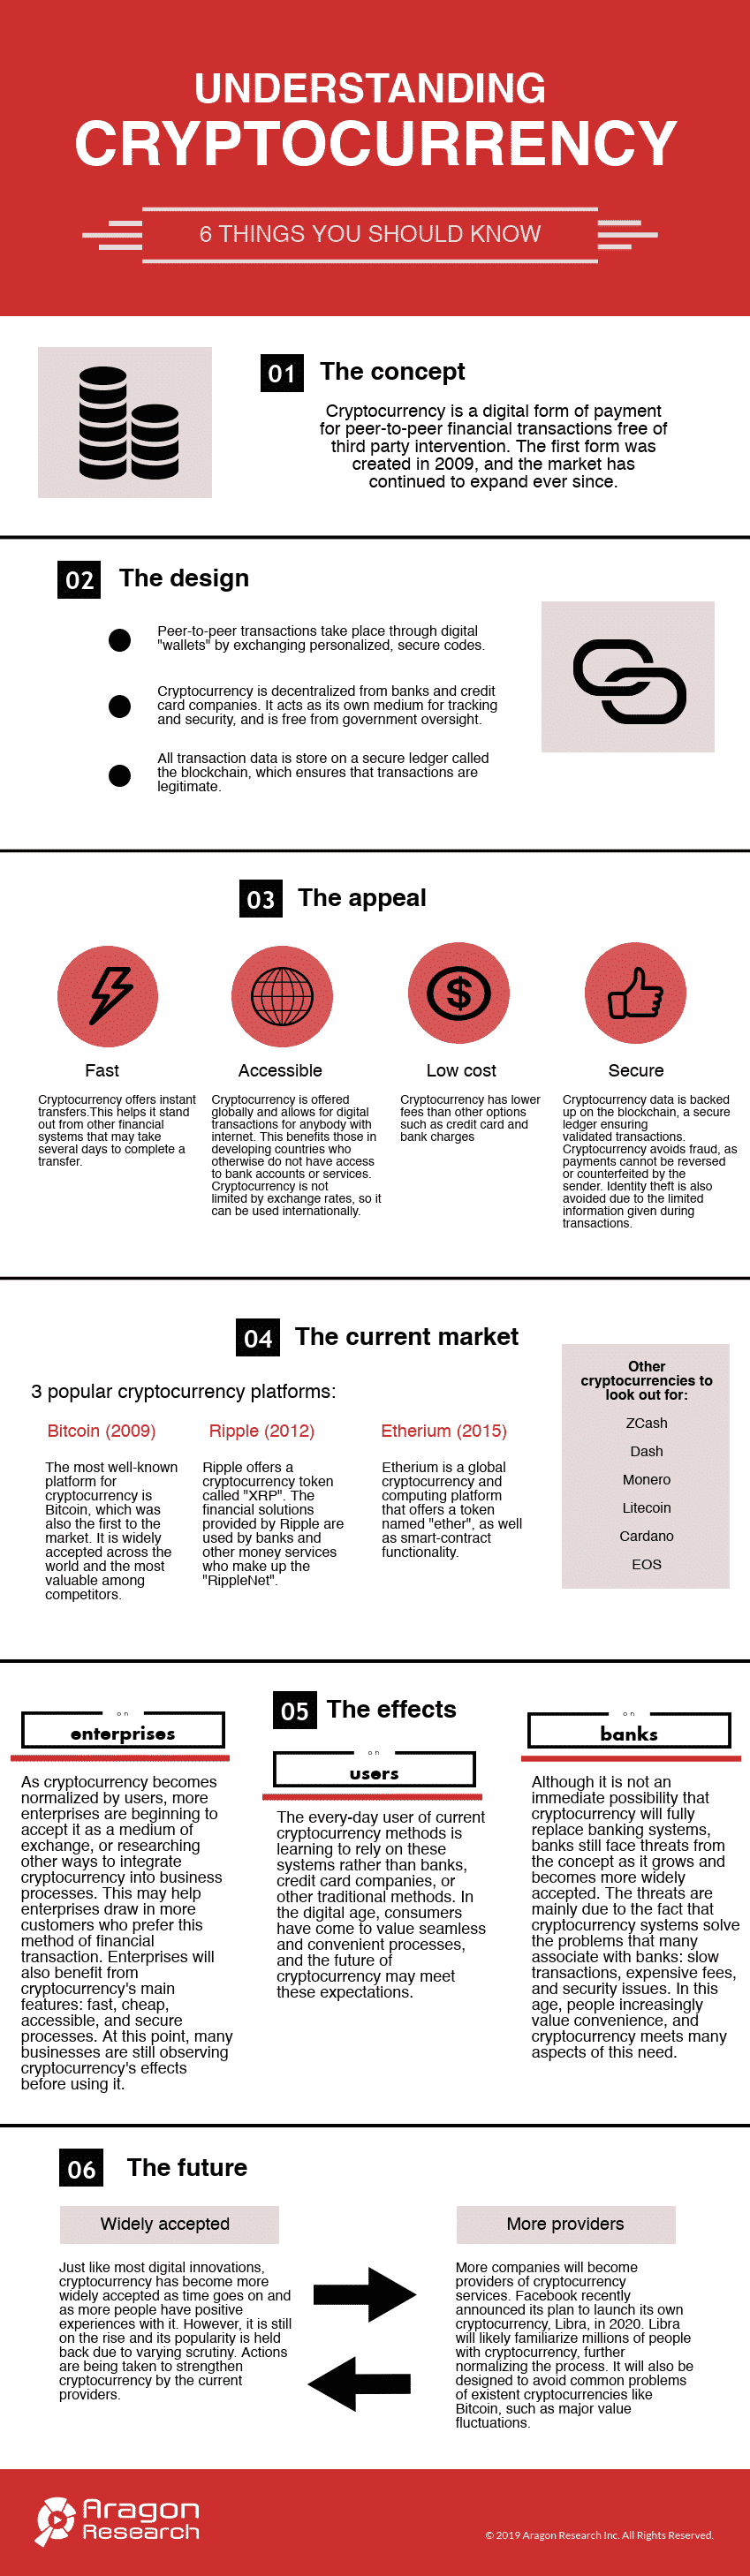 5c infographic  39641791 - [Infographic] Cryptocurrency